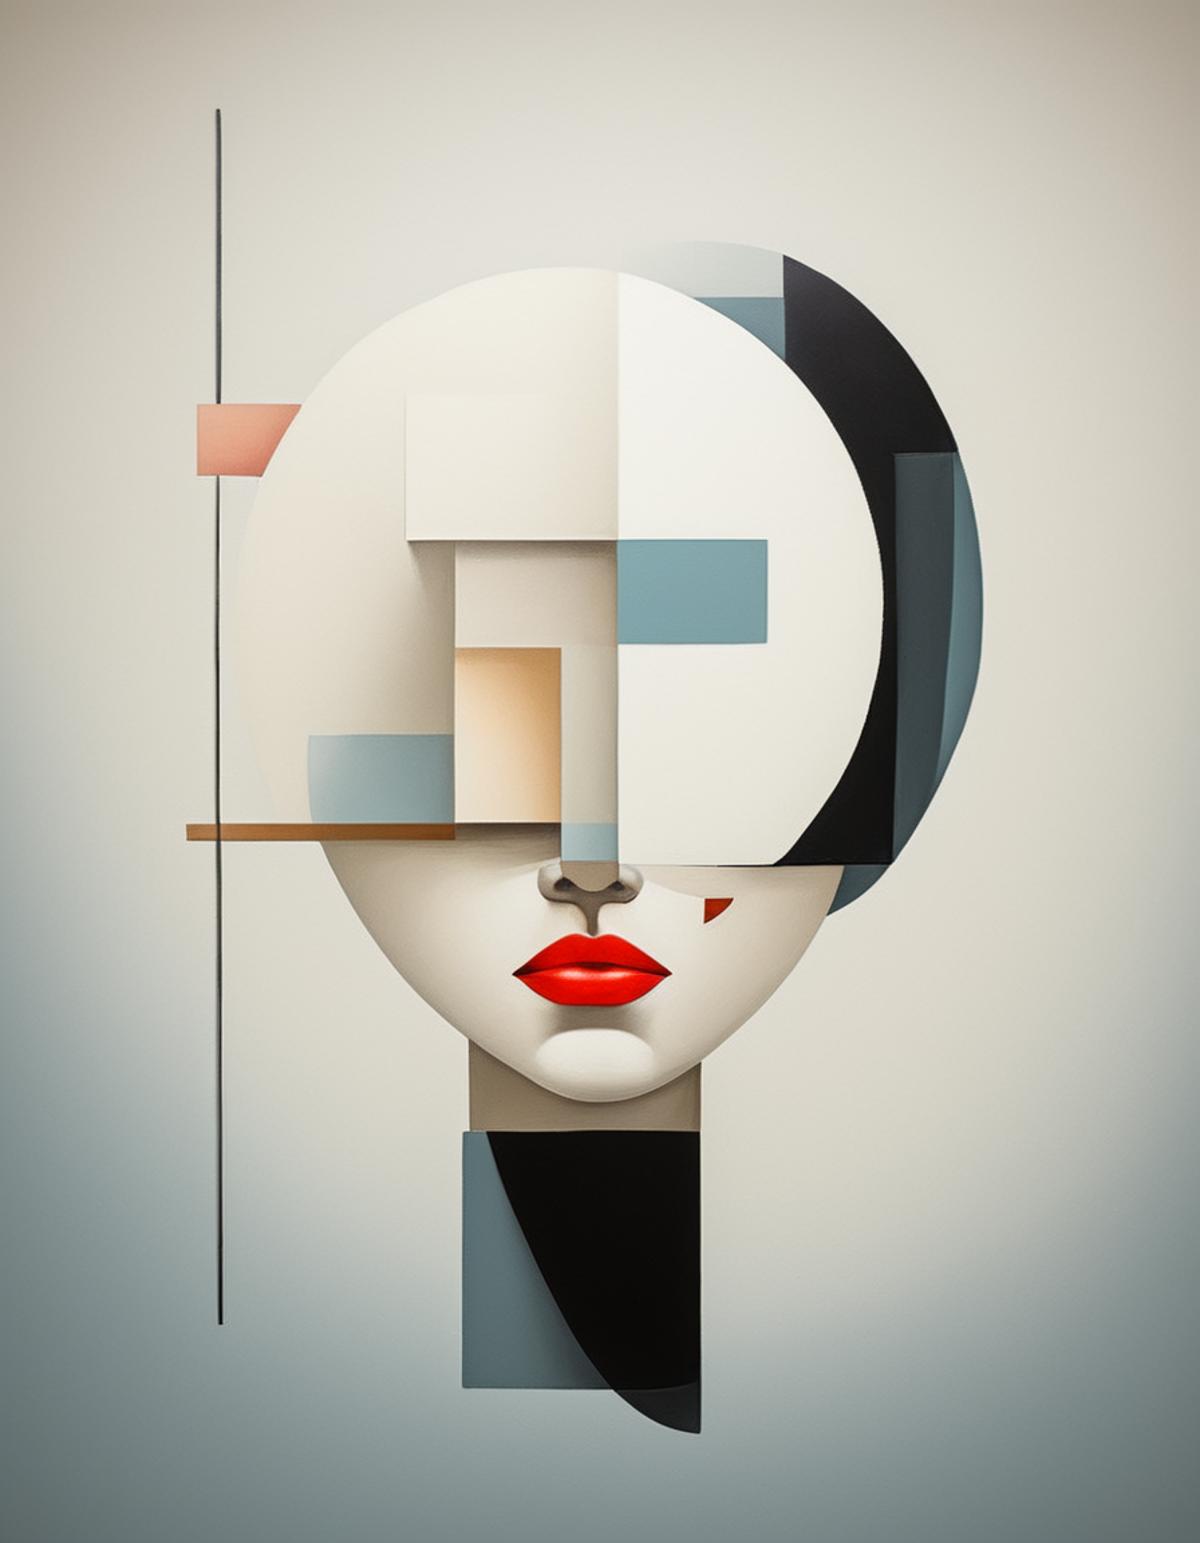 Artistic Illustration of a Woman's Face with Different Colors and Shapes.